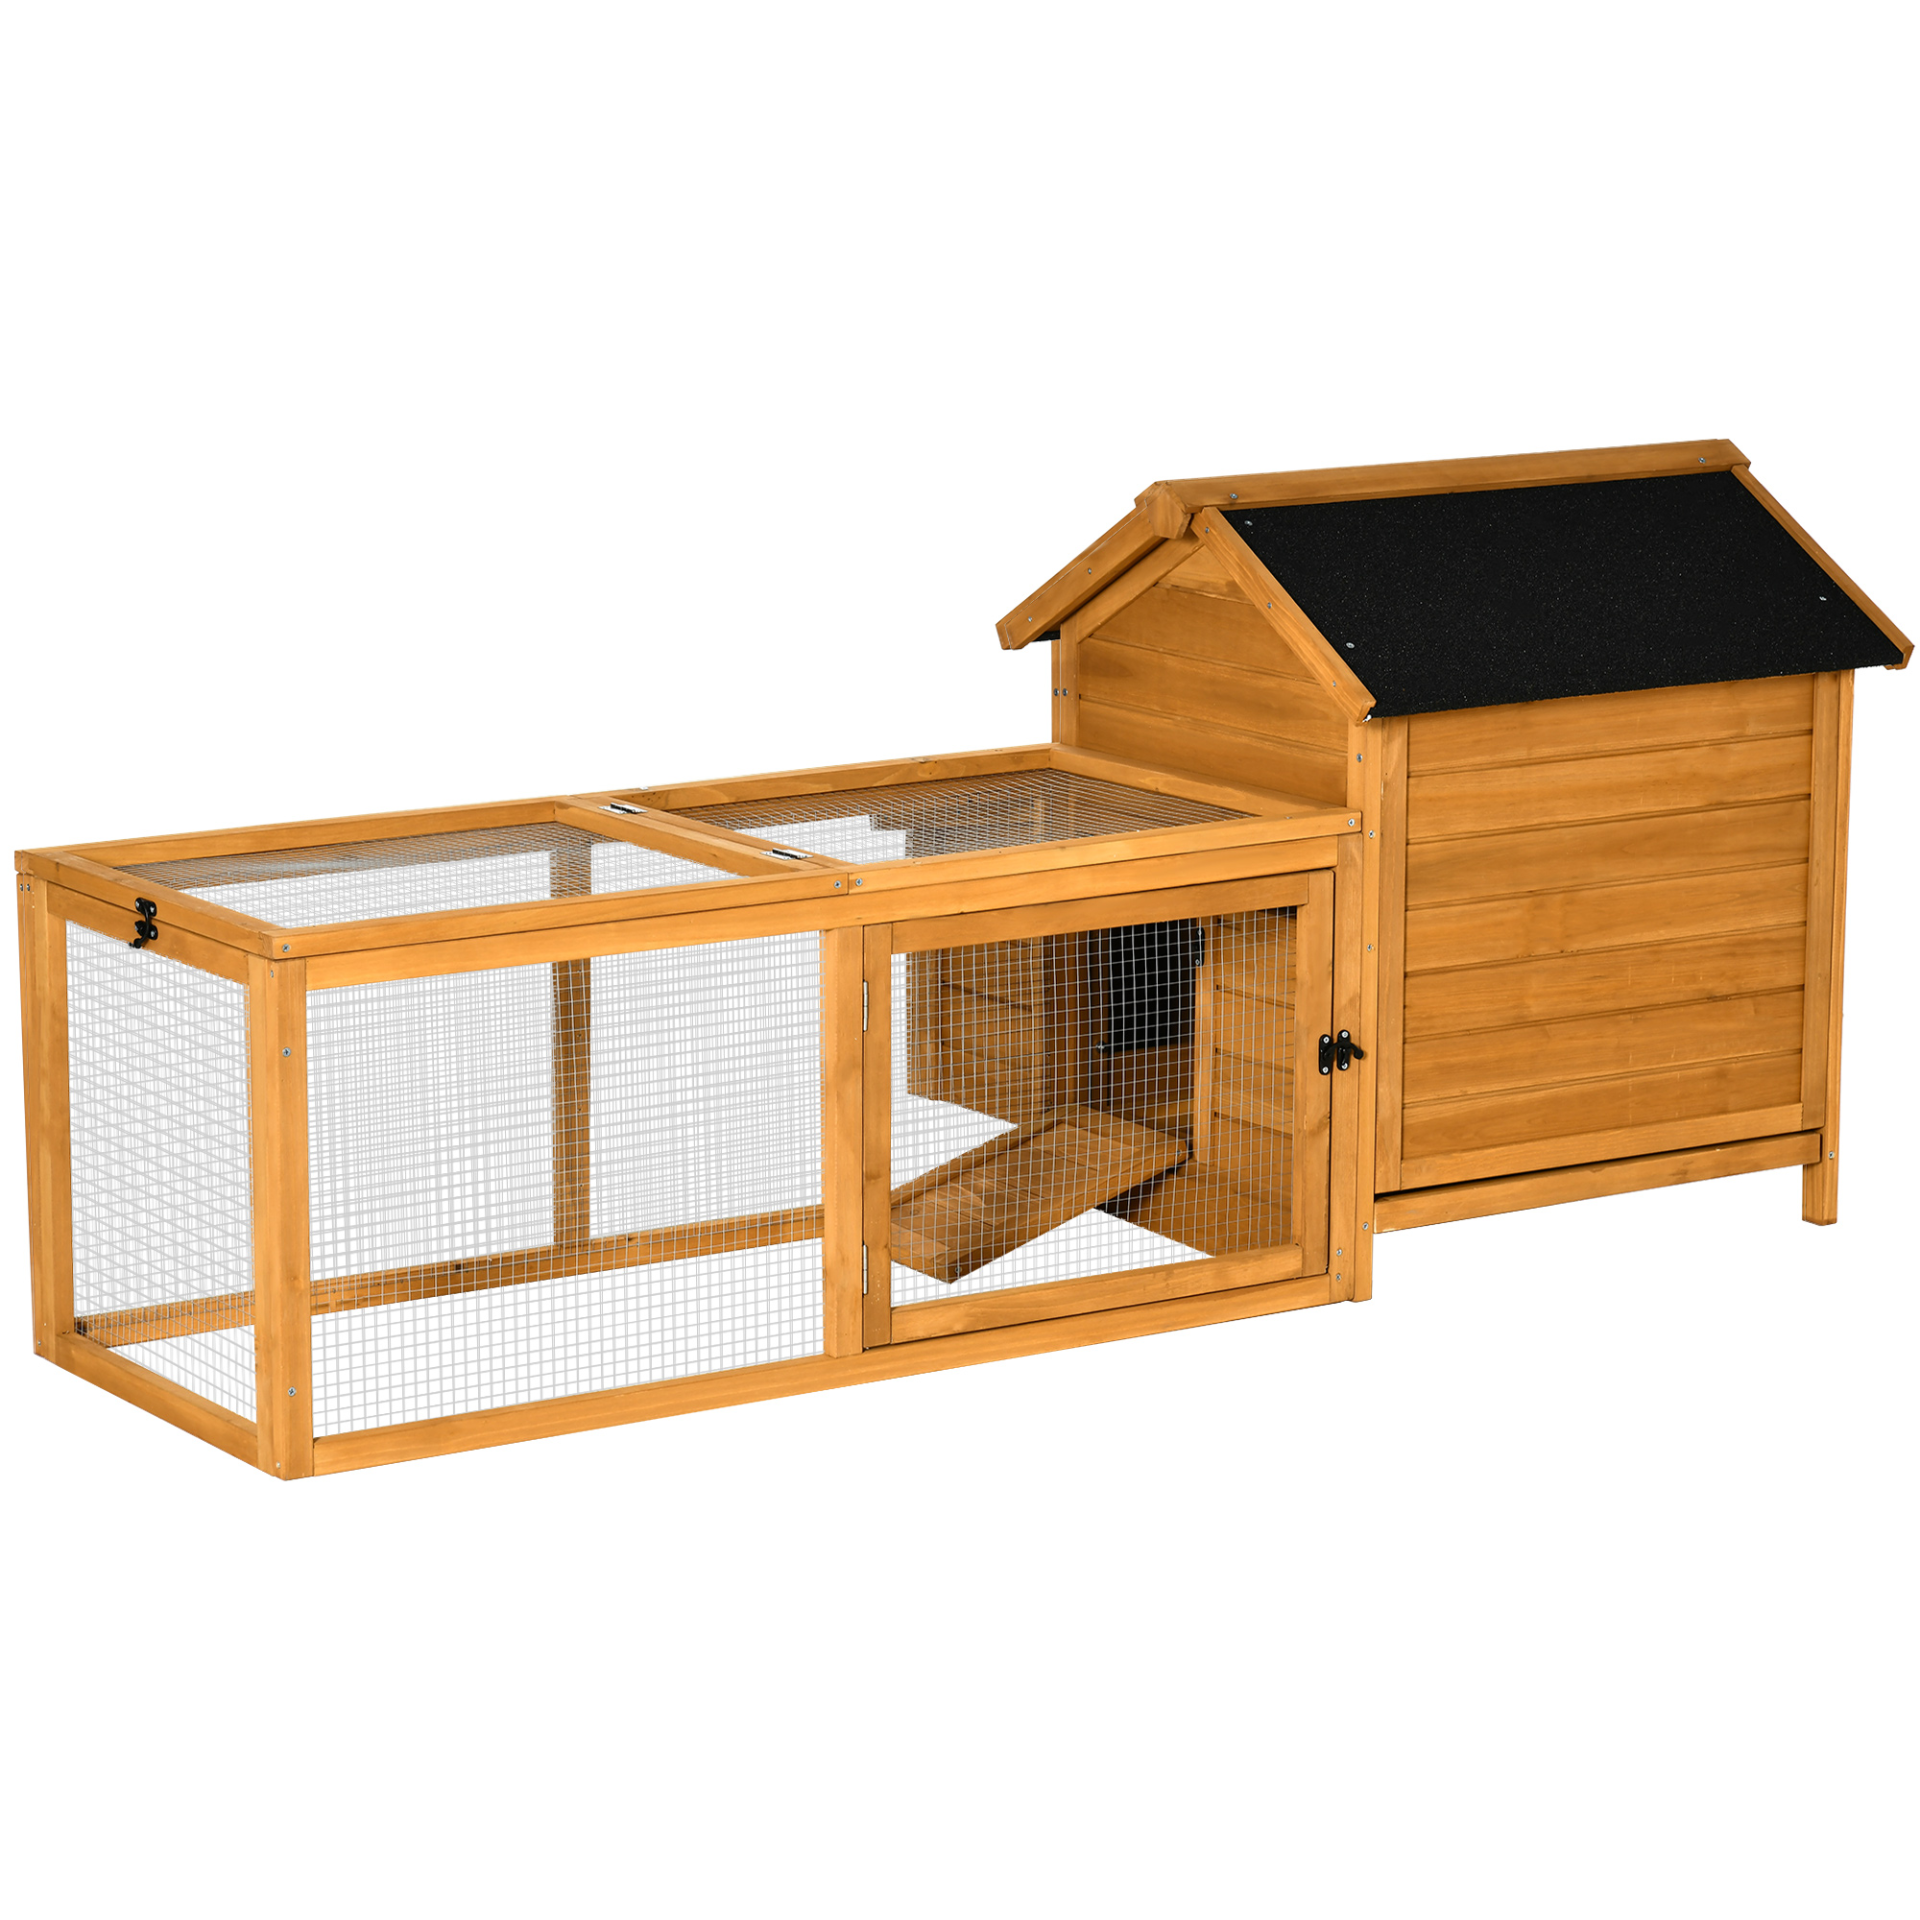 PawHut Chicken Coop with Run Hen House Wooden Poultry Cage Coops w/ Nesting Box Removable Tray Outdoor 180 x 92 x 78 cm, Yellow